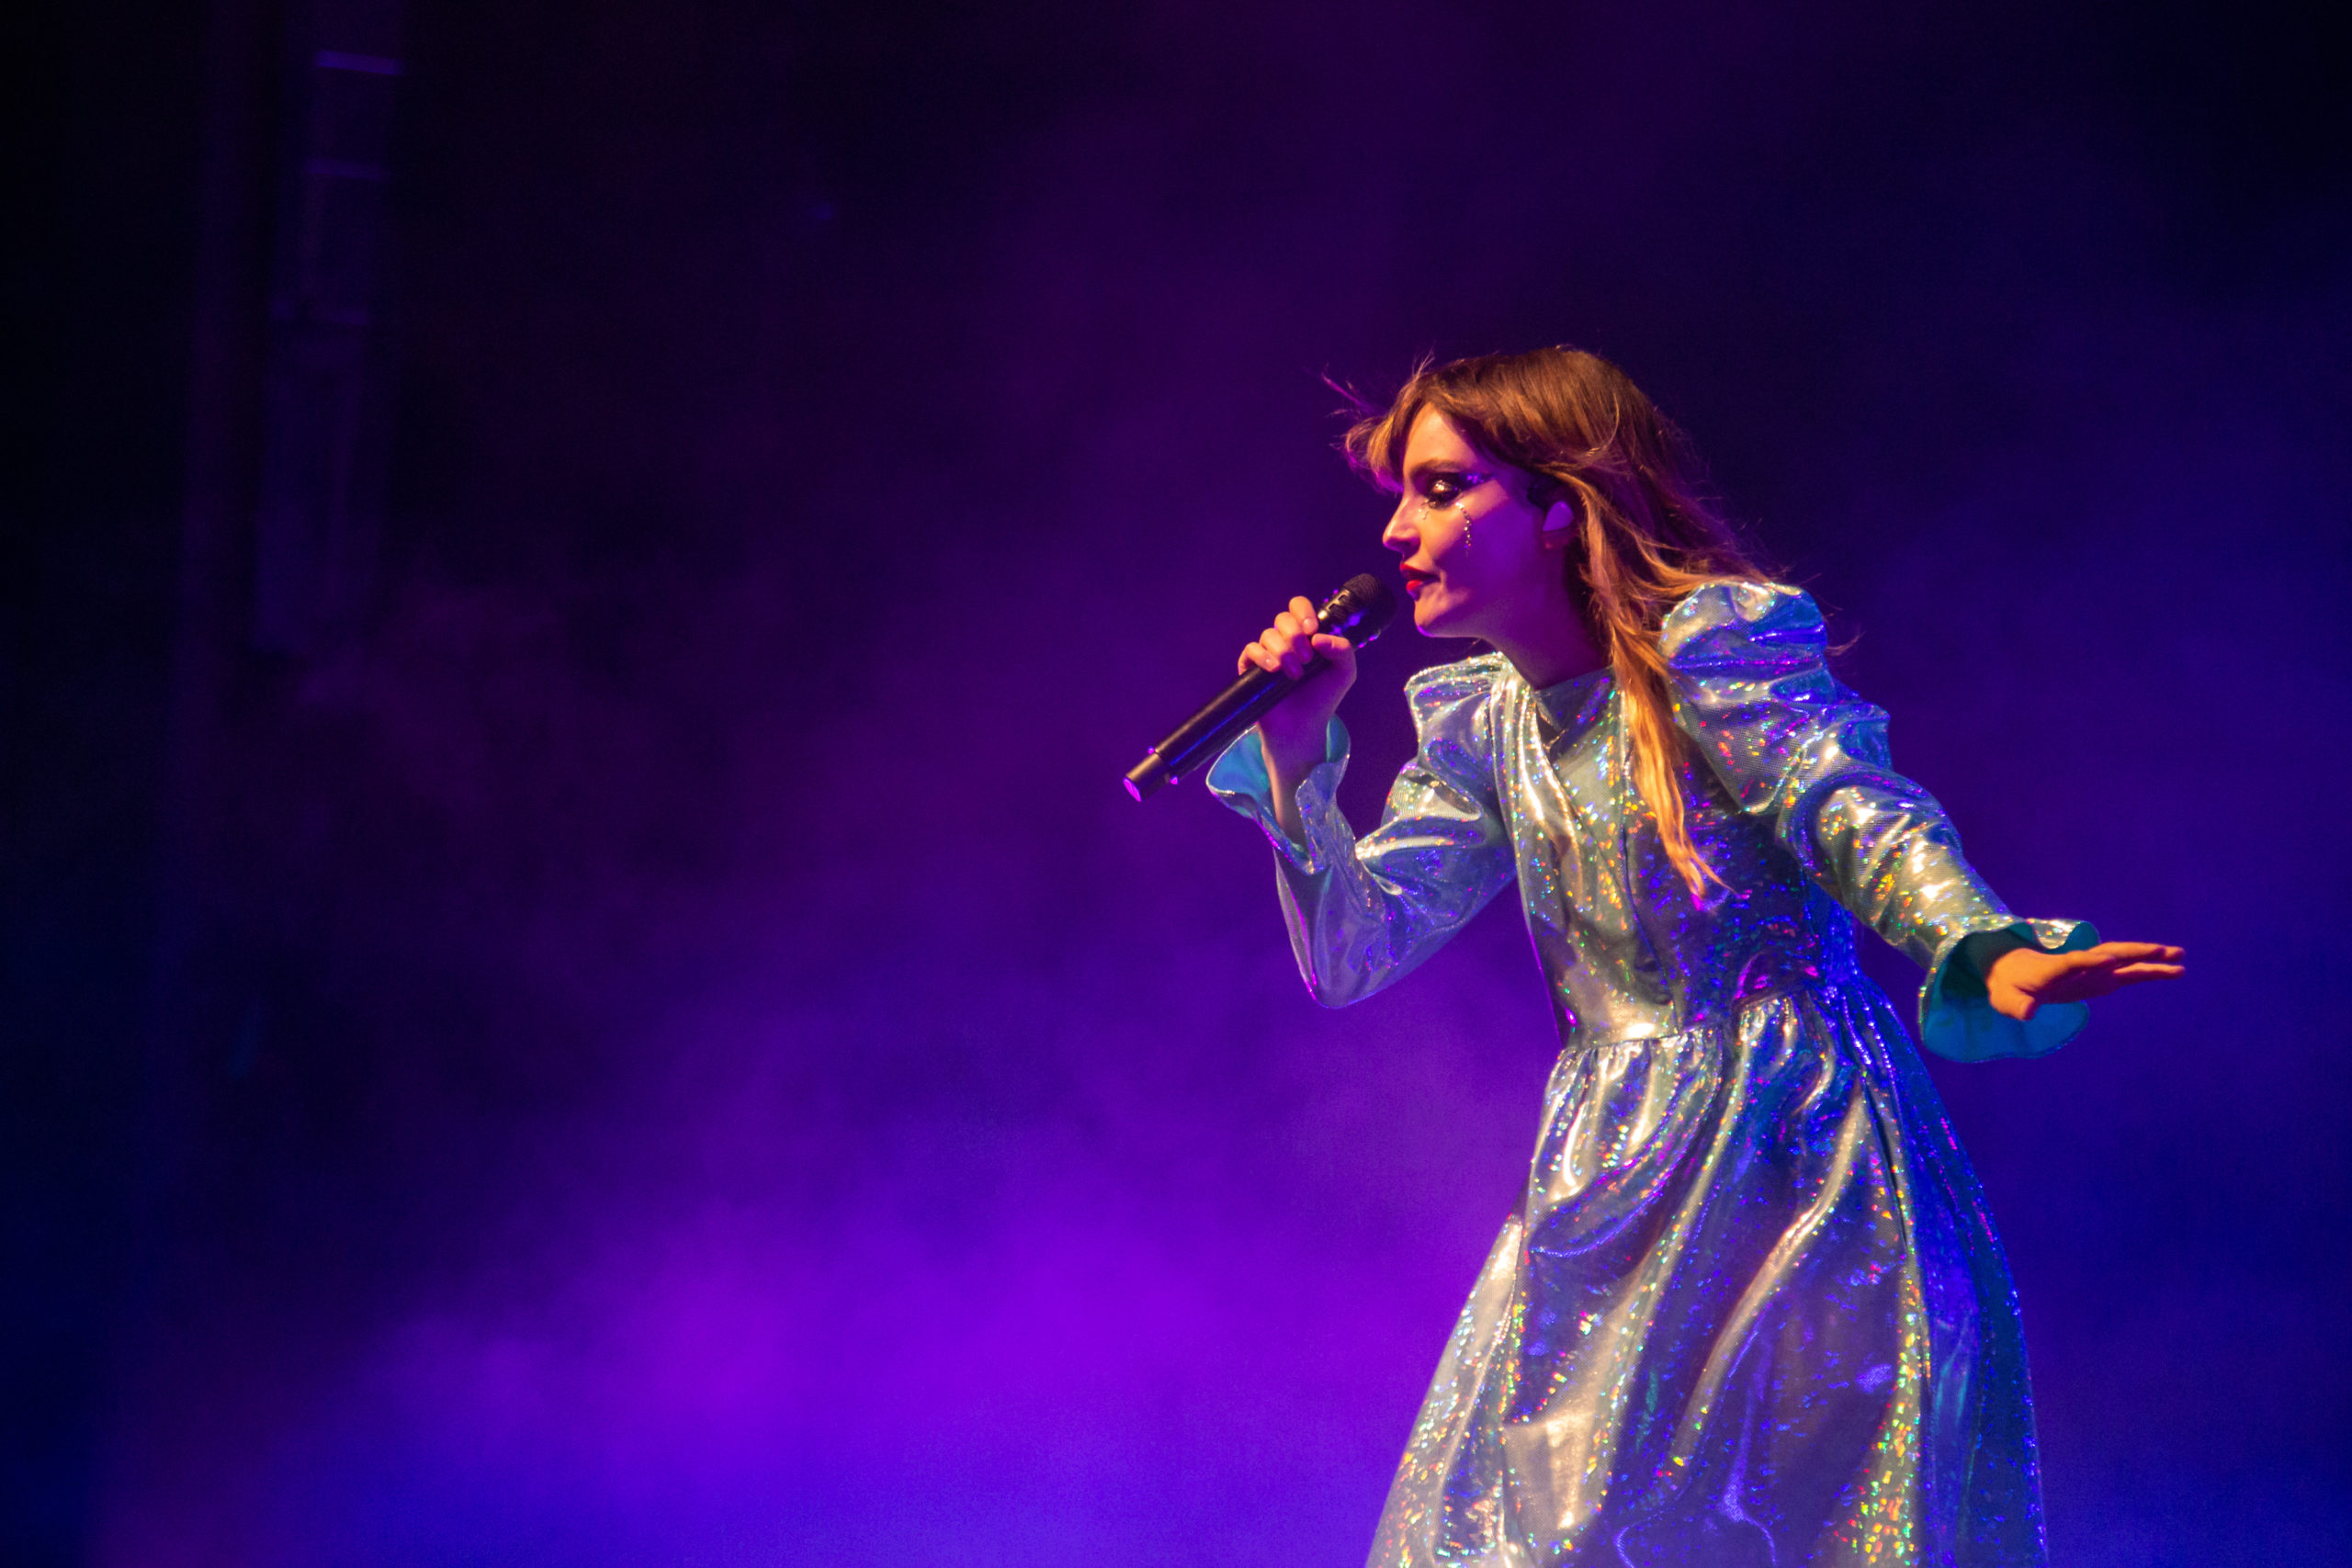 In an iridescent dress, Lauren Mayberry dazzles the crowd at the Queen Elizabeth Theatre